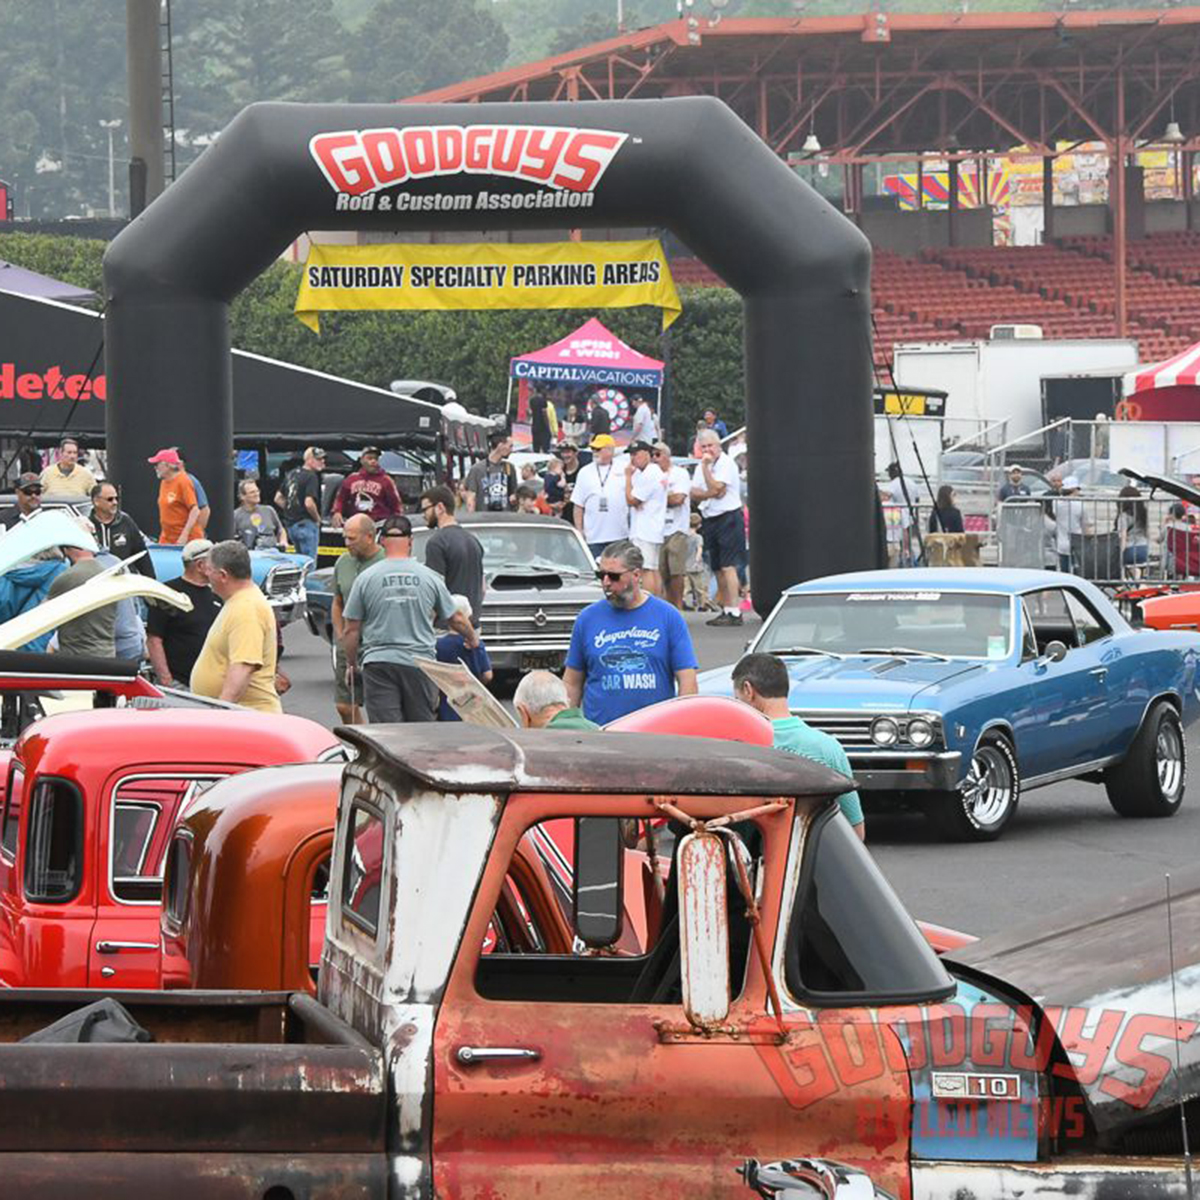 Great recap of the recent @Goodguys Griot’s Garage North Carolina Nationals presented by TREMEC! Awesome seeing all the #TREMECequipped vehicles at the show, talking with everyone looking to install a TREMEC 5-/6-speed in their car bit.ly/3UBdKCx  #goodguys #carshow